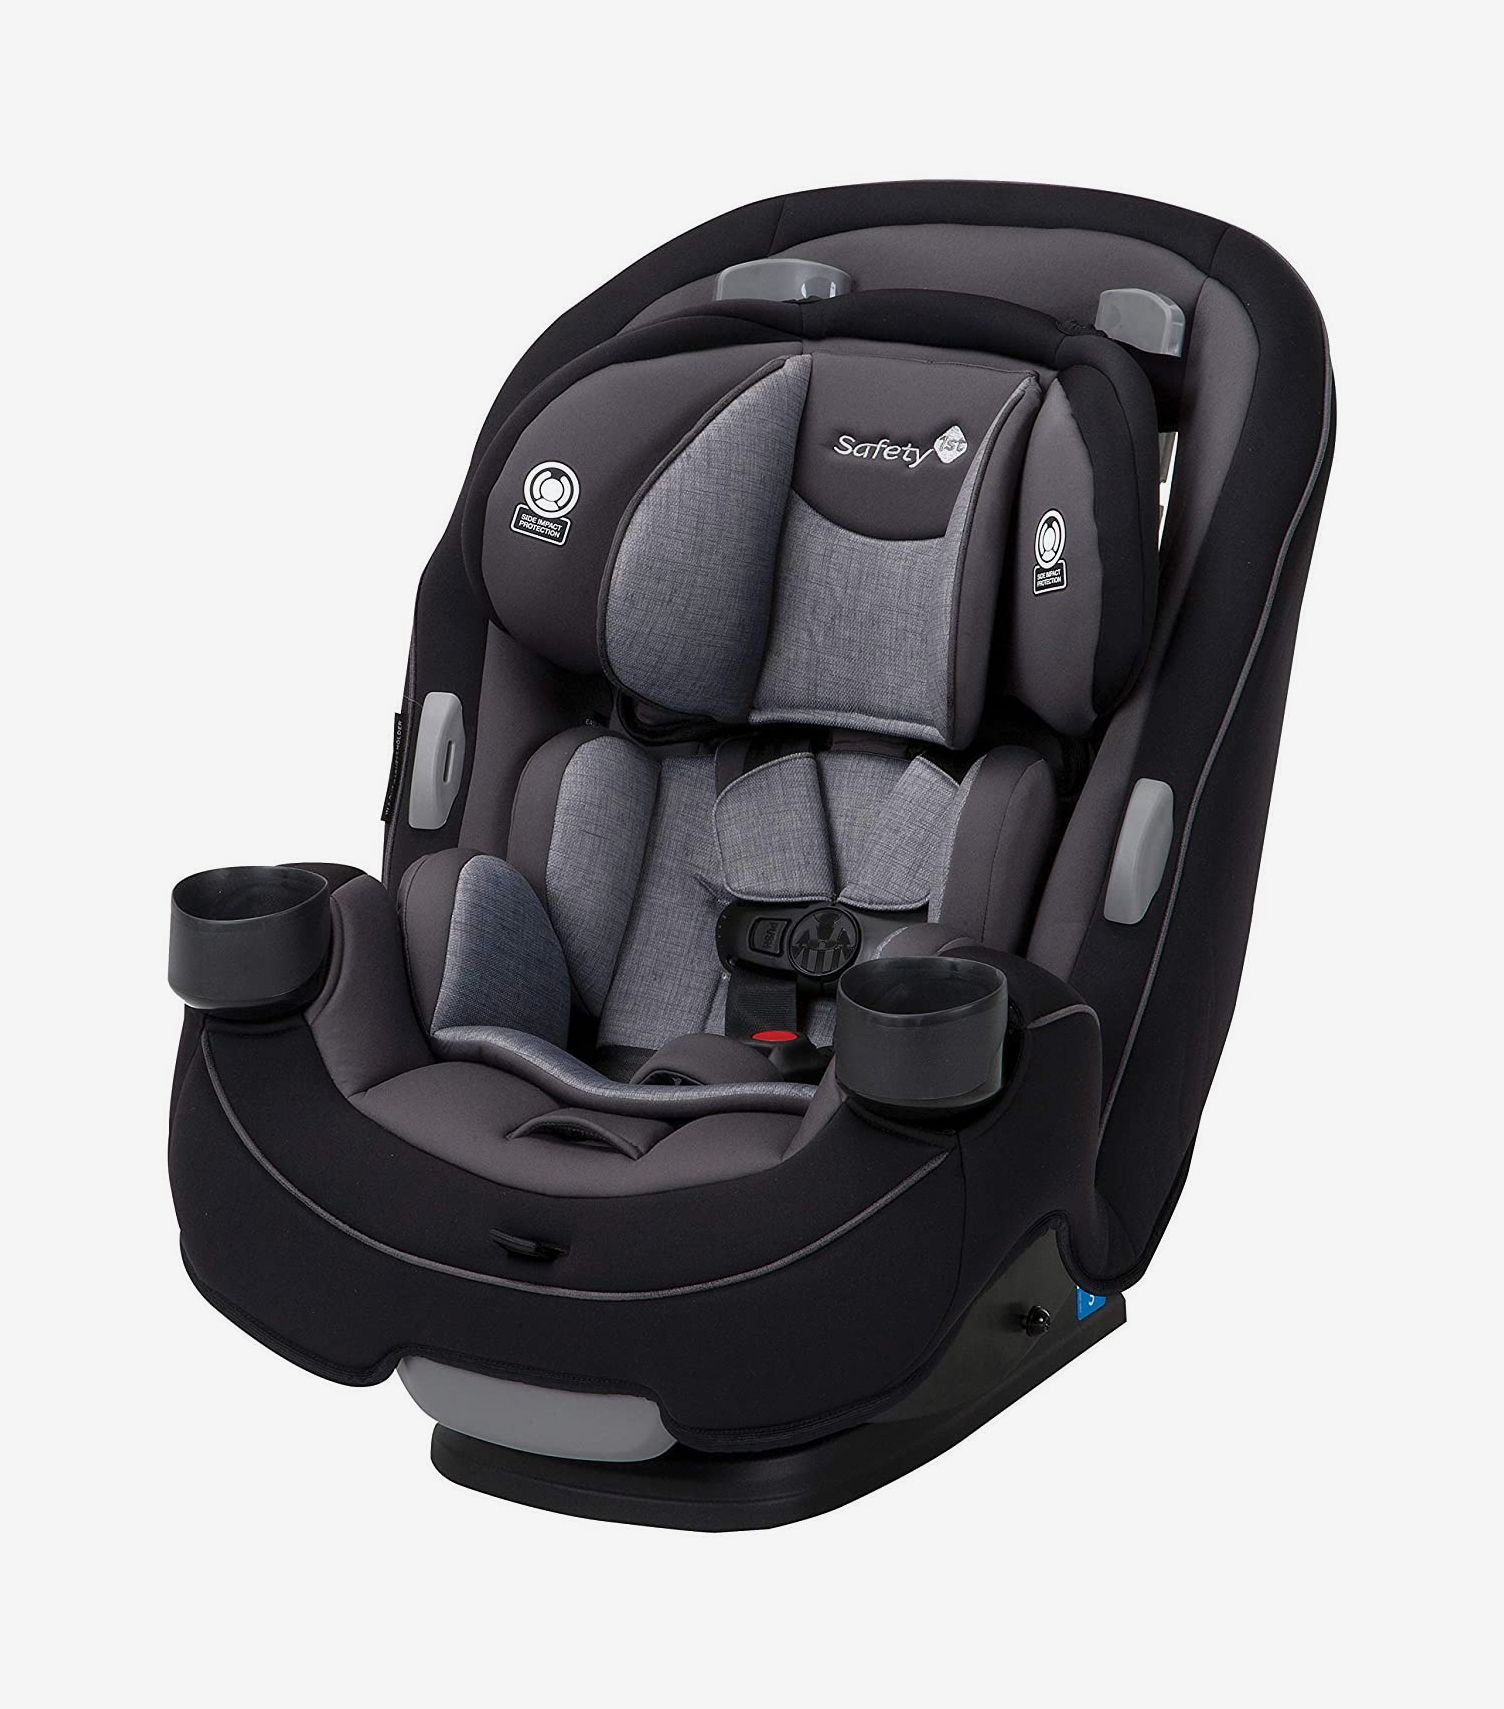 25 Best Infant Car Seats And Booster 2020 The Strategist - Top Baby Car Seats 2020